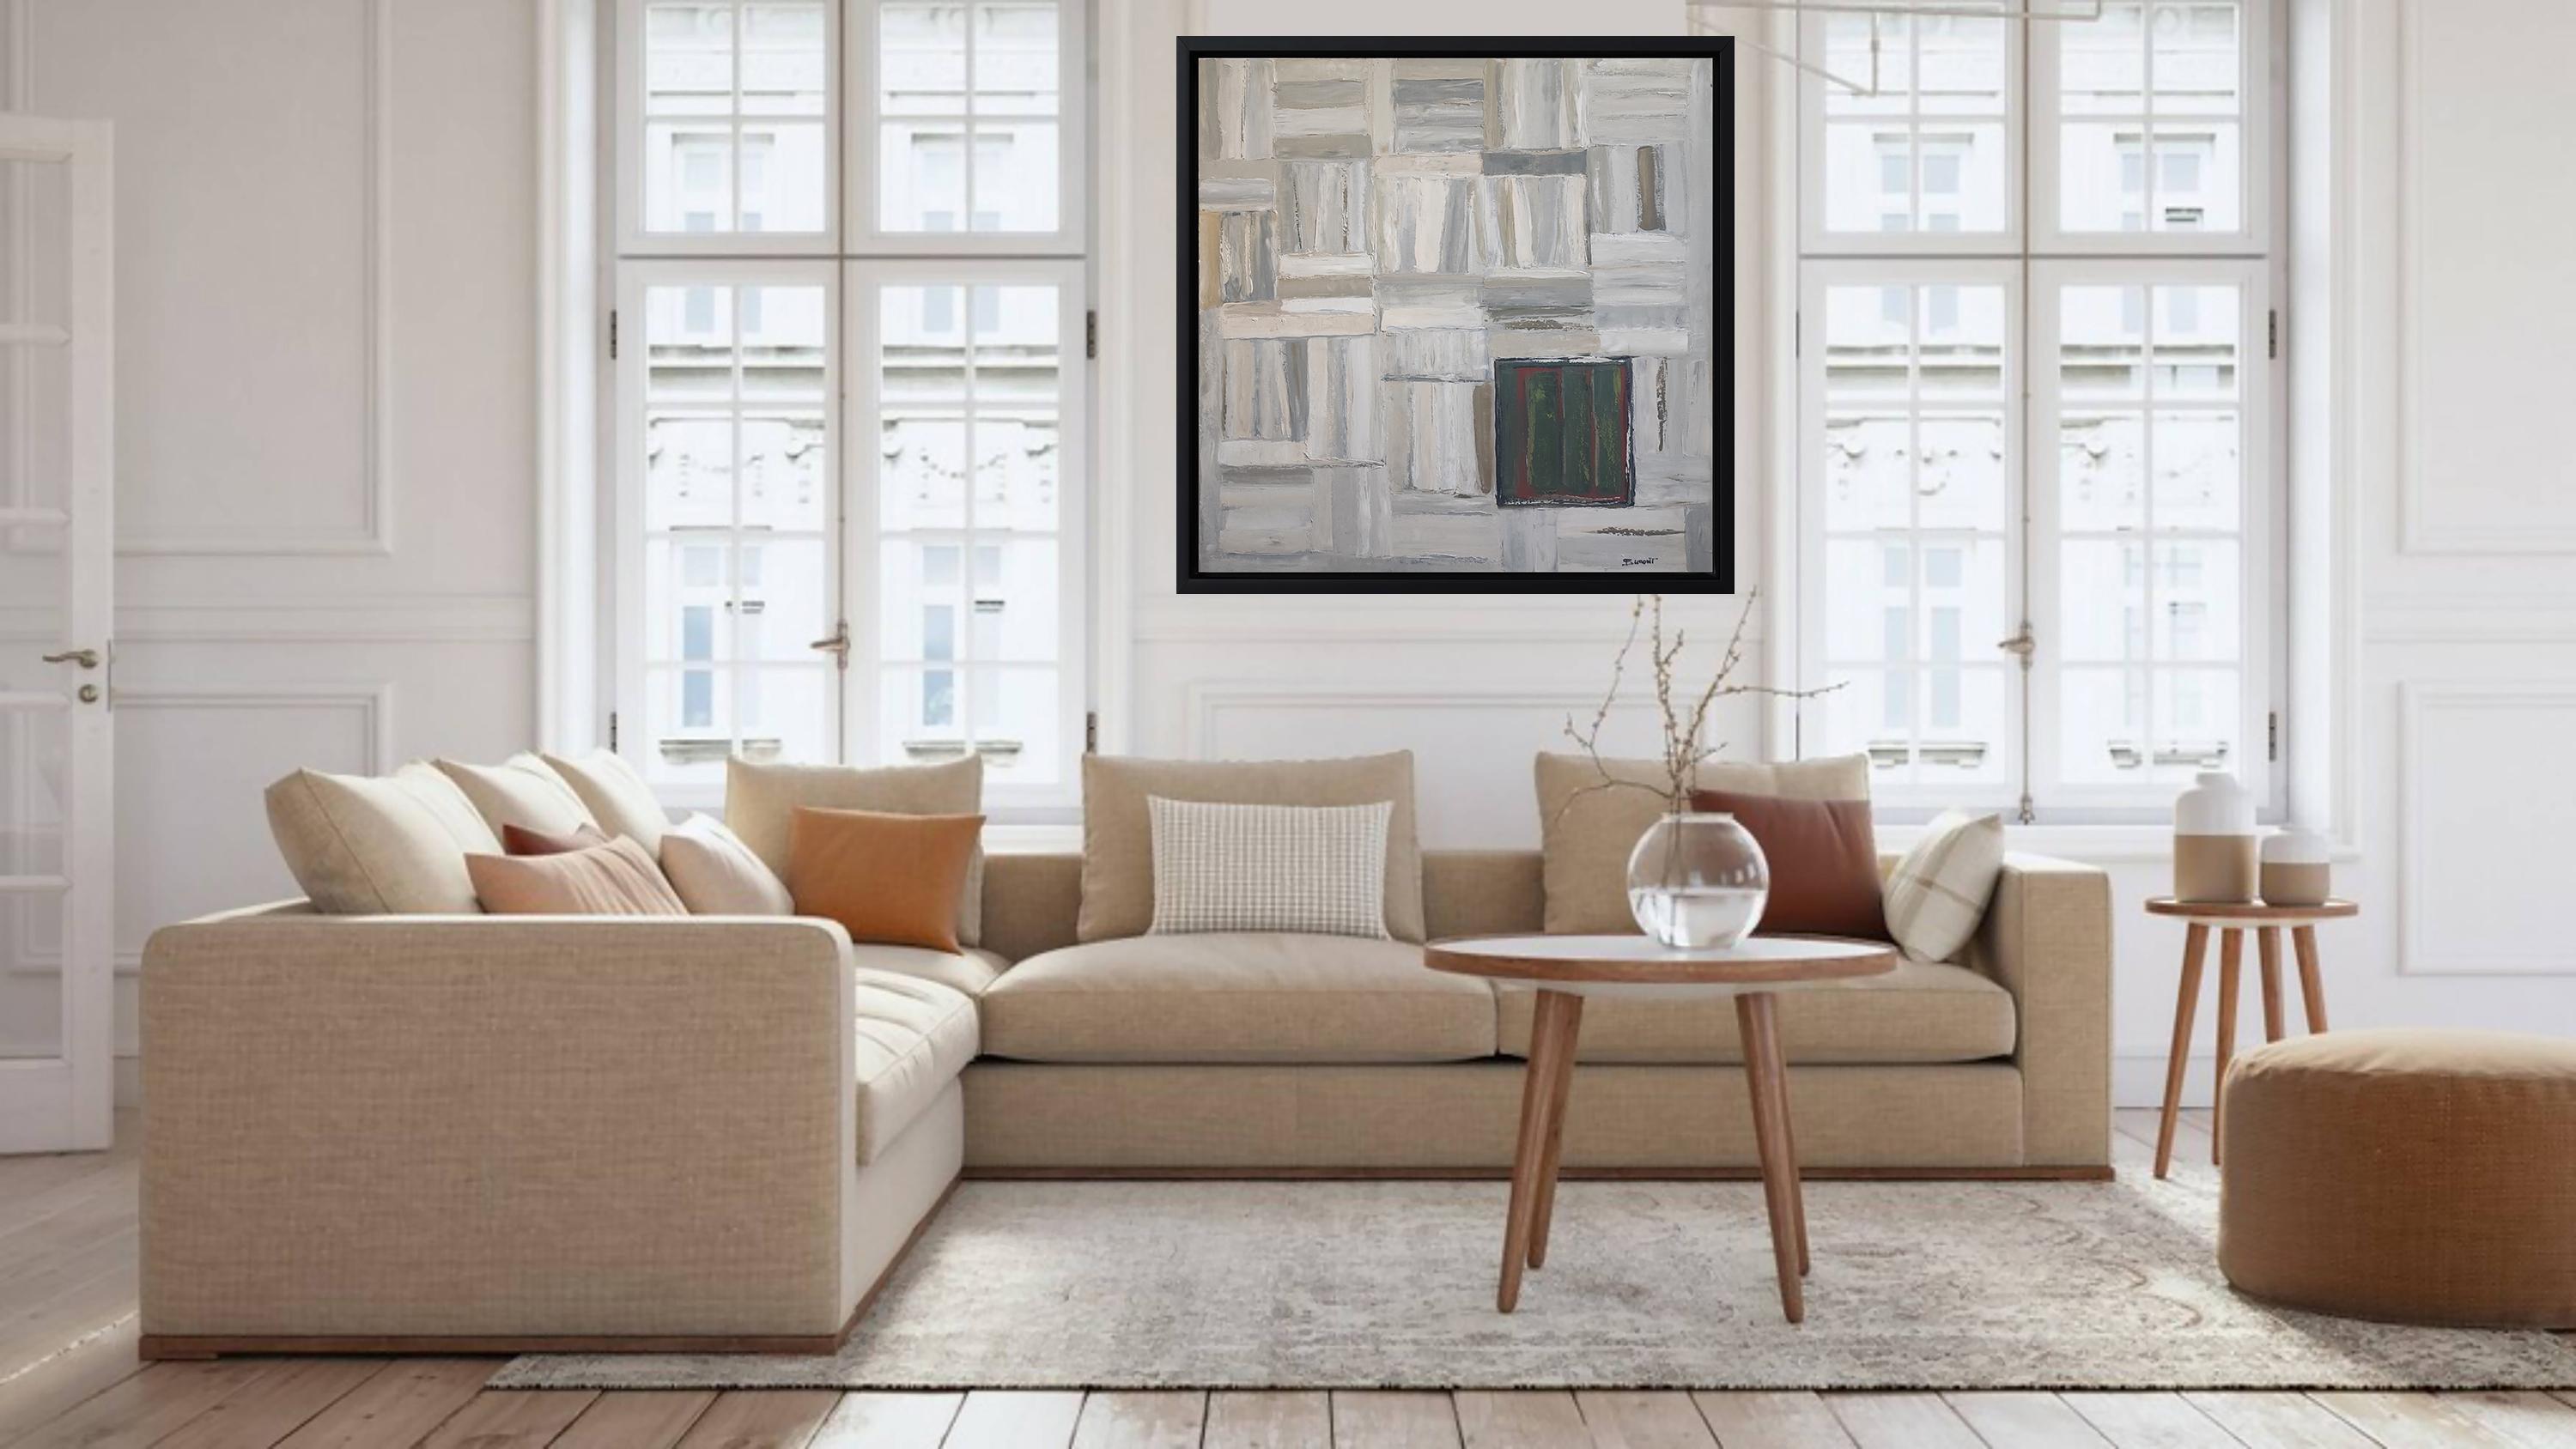 tendance, oil on canas, library, white, textured, impasto, modern, minimalism - Gray Interior Painting by SOPHIE DUMONT